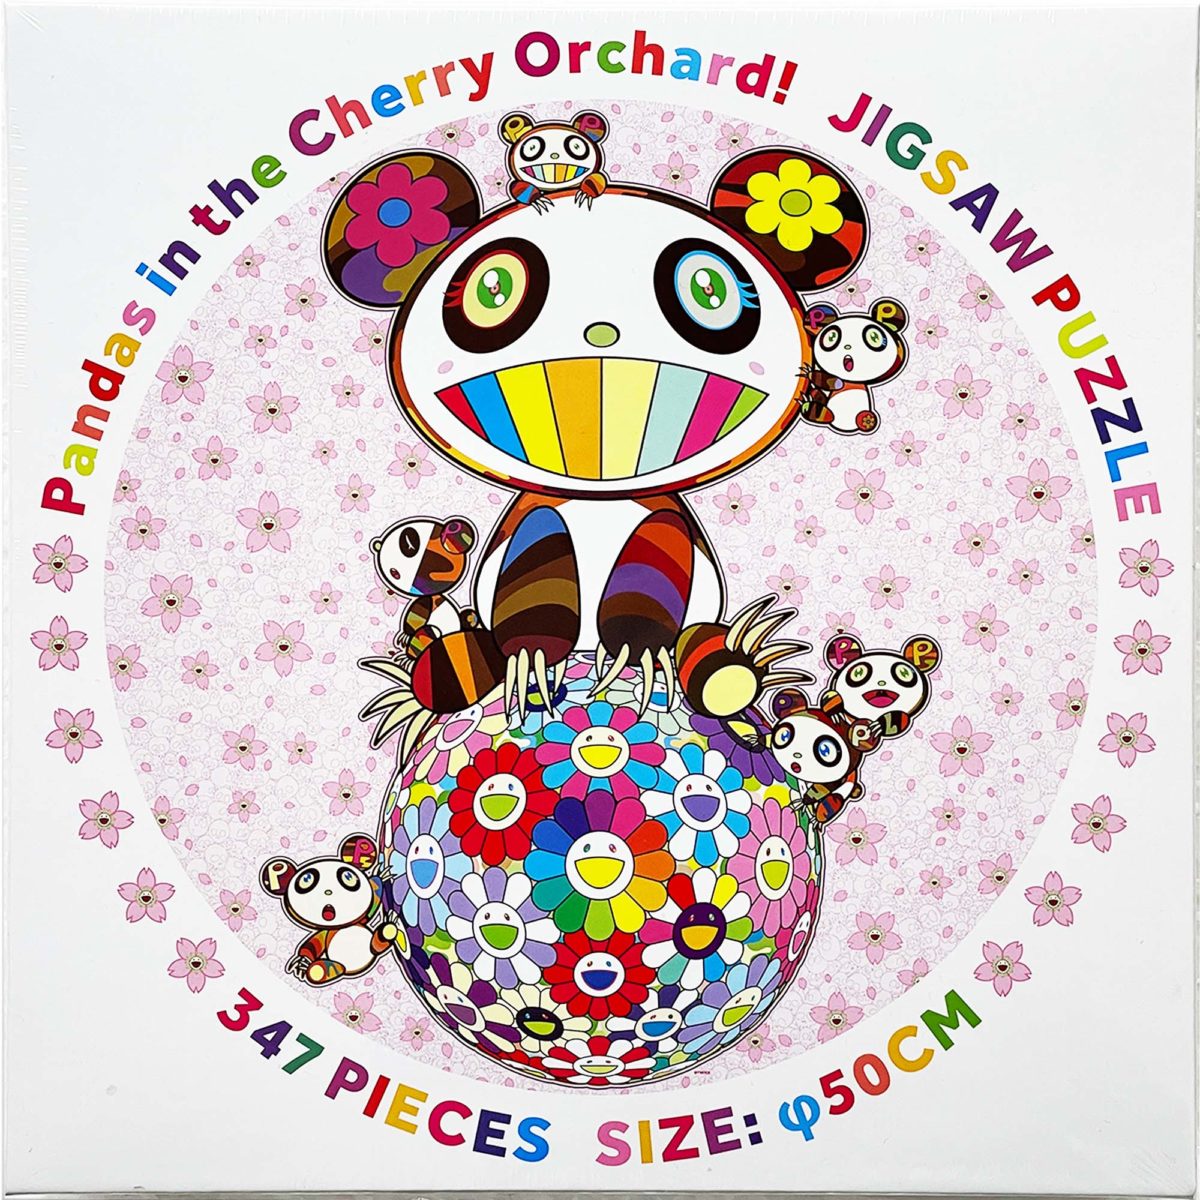 Jigsaw Puzzle/Pandas in the Cherry Orchard! | Zingaro official Web